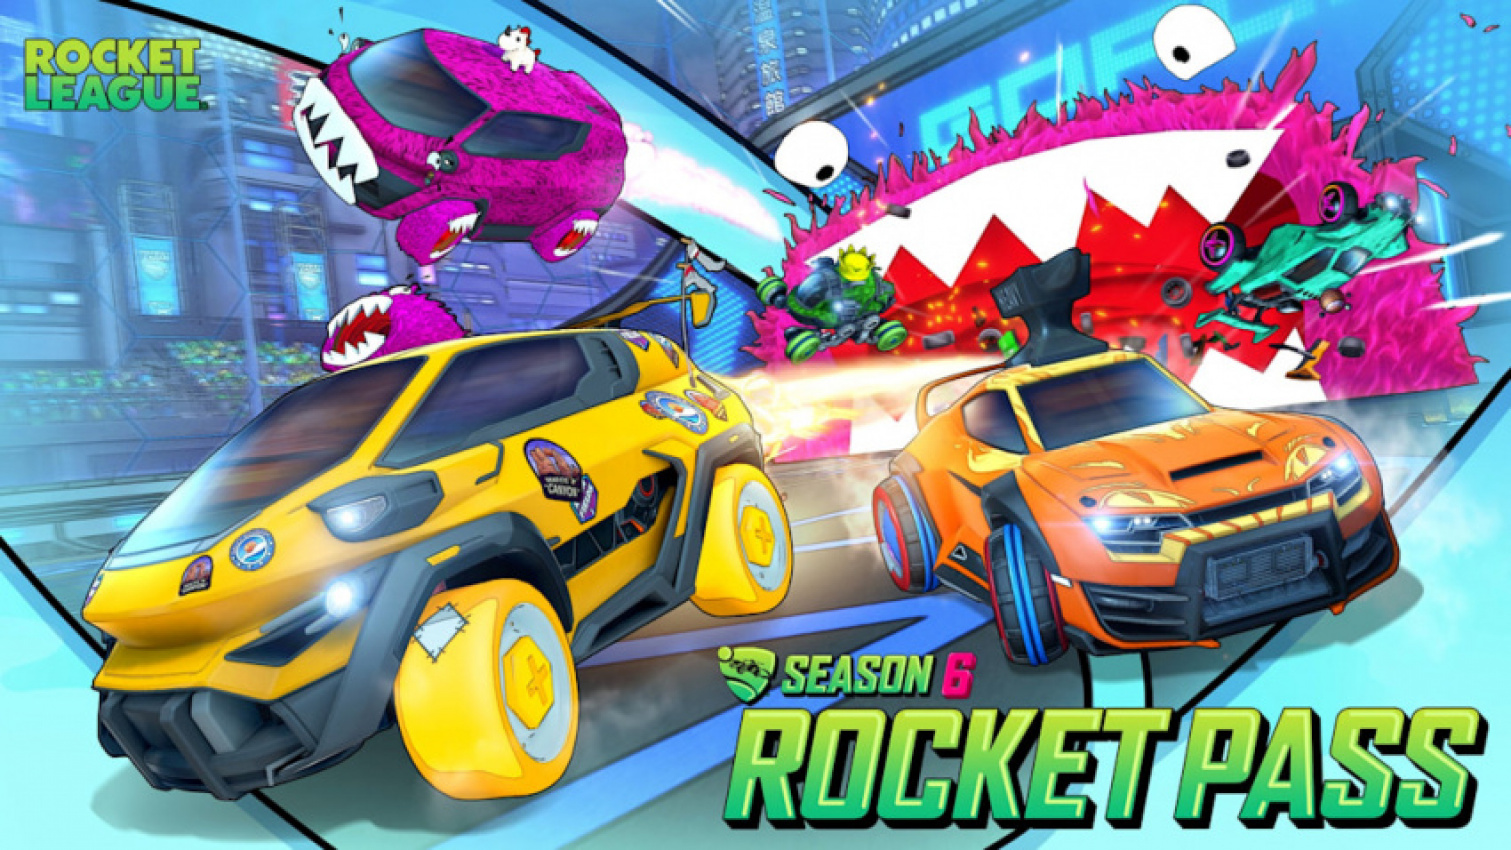 autos, cars, toys/games, gaming, gaming roundup, gran turismo, rocket league, new 'rocket league' season is here and it's very animated | gaming roundup